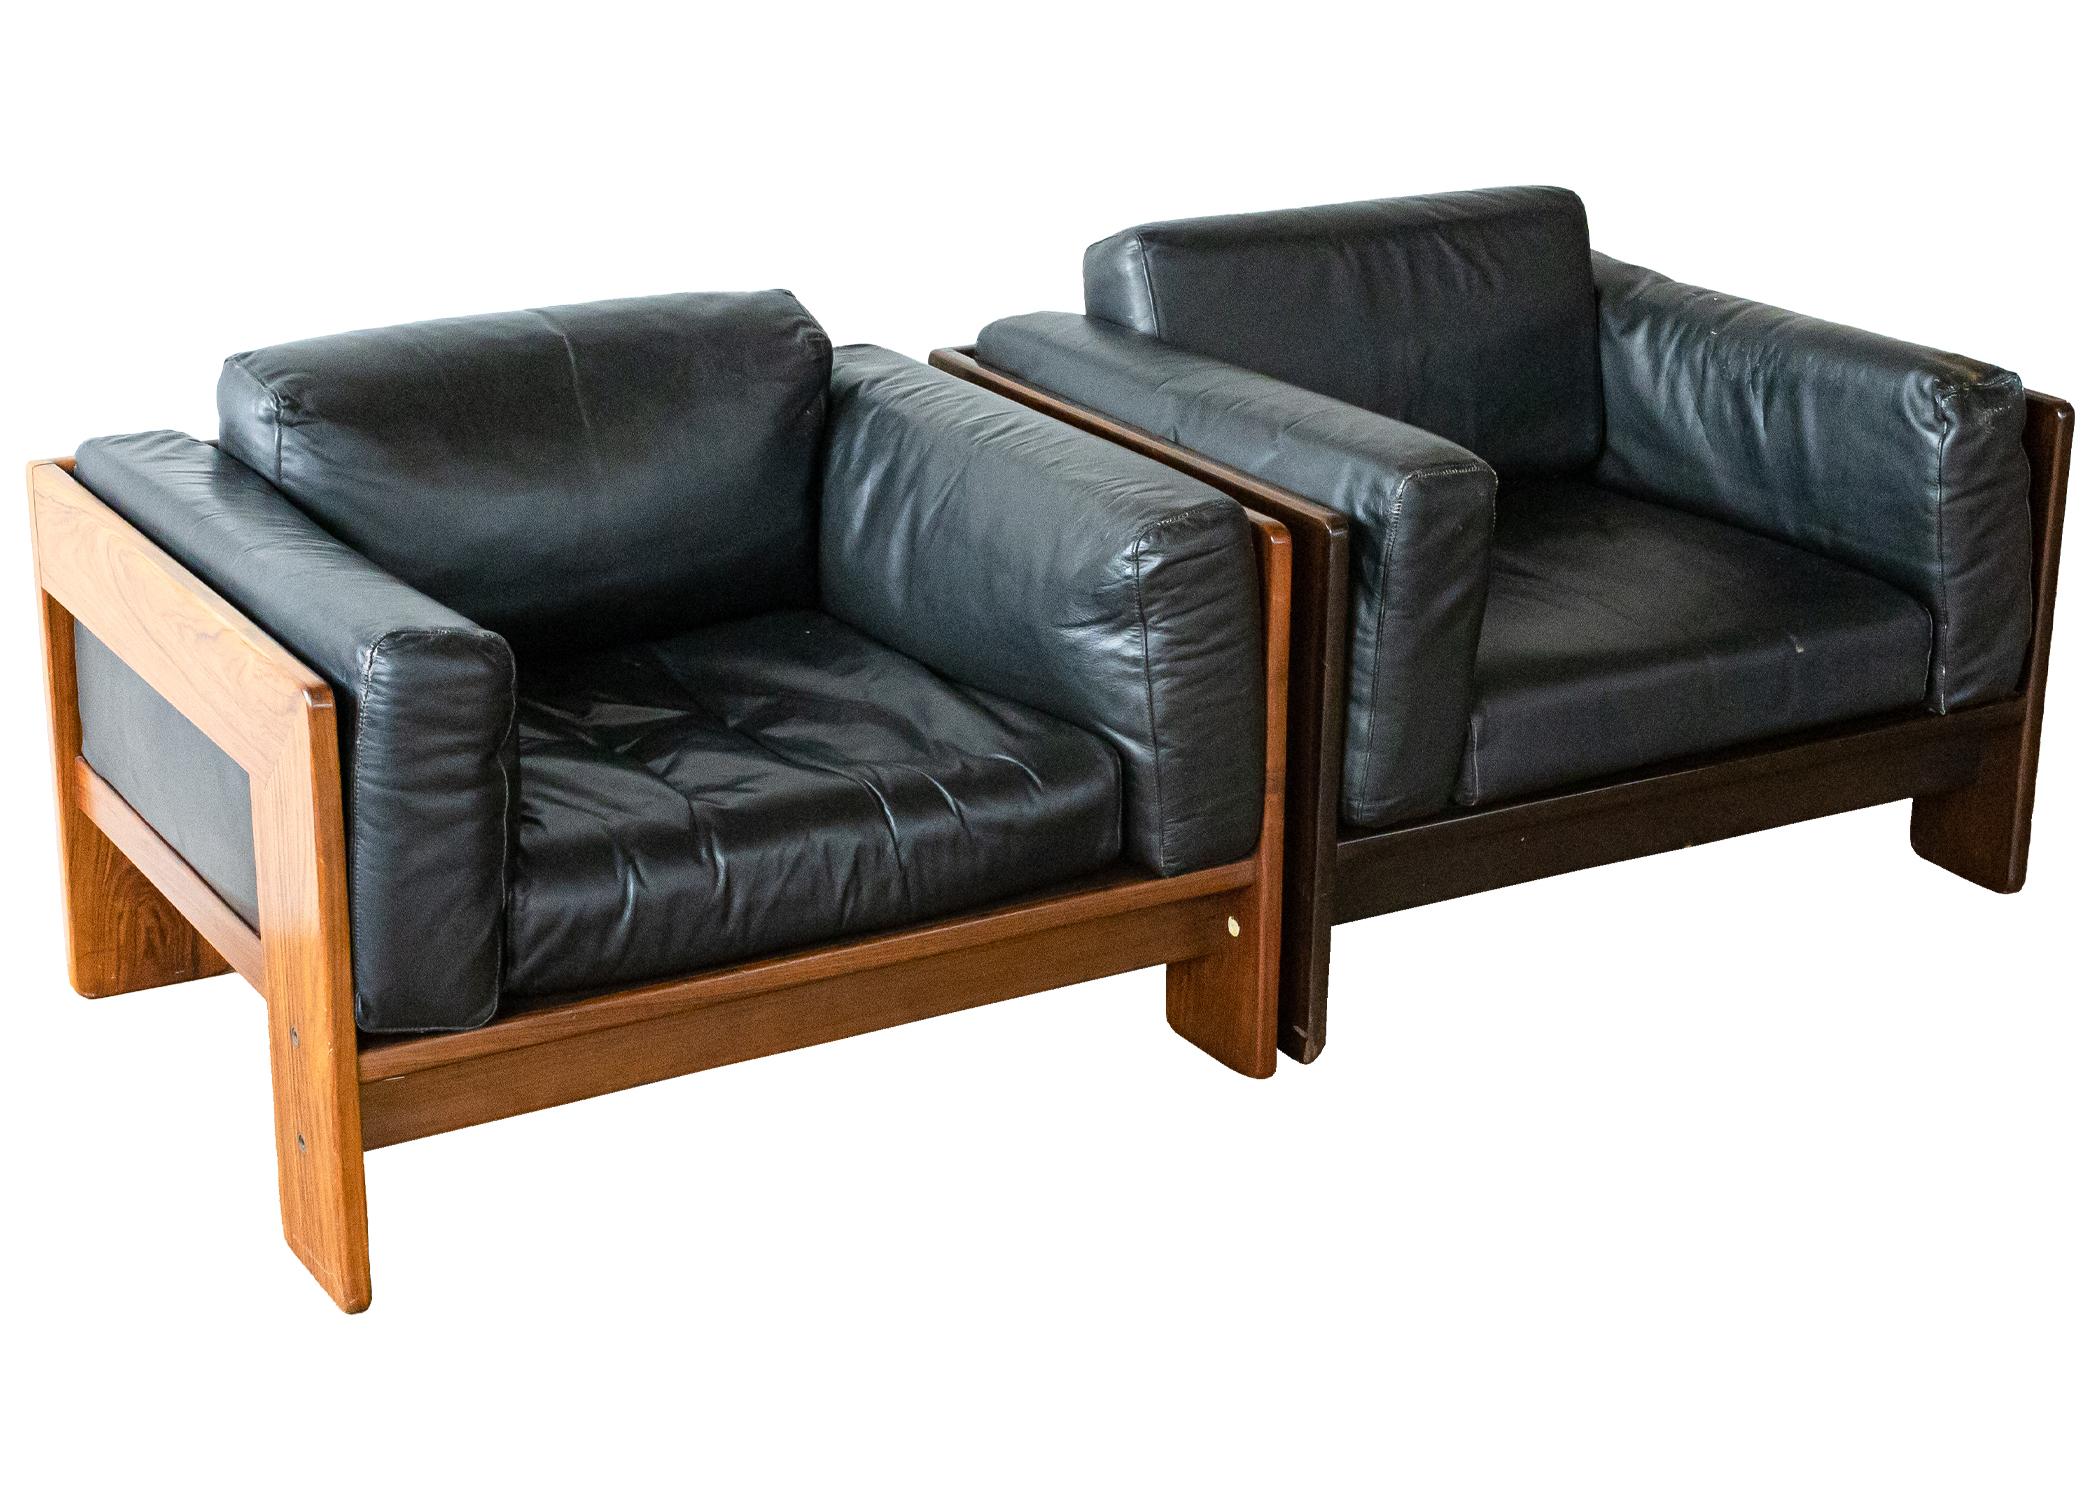 A set of 2 Tobia Scarpa Bastiano rosewood black leather chairs. This stunning set of Bastiano lounge chairs feature a rare rosewood construction. Each chair has a different finish; one light, and one dark. The black leather of both chairs is still